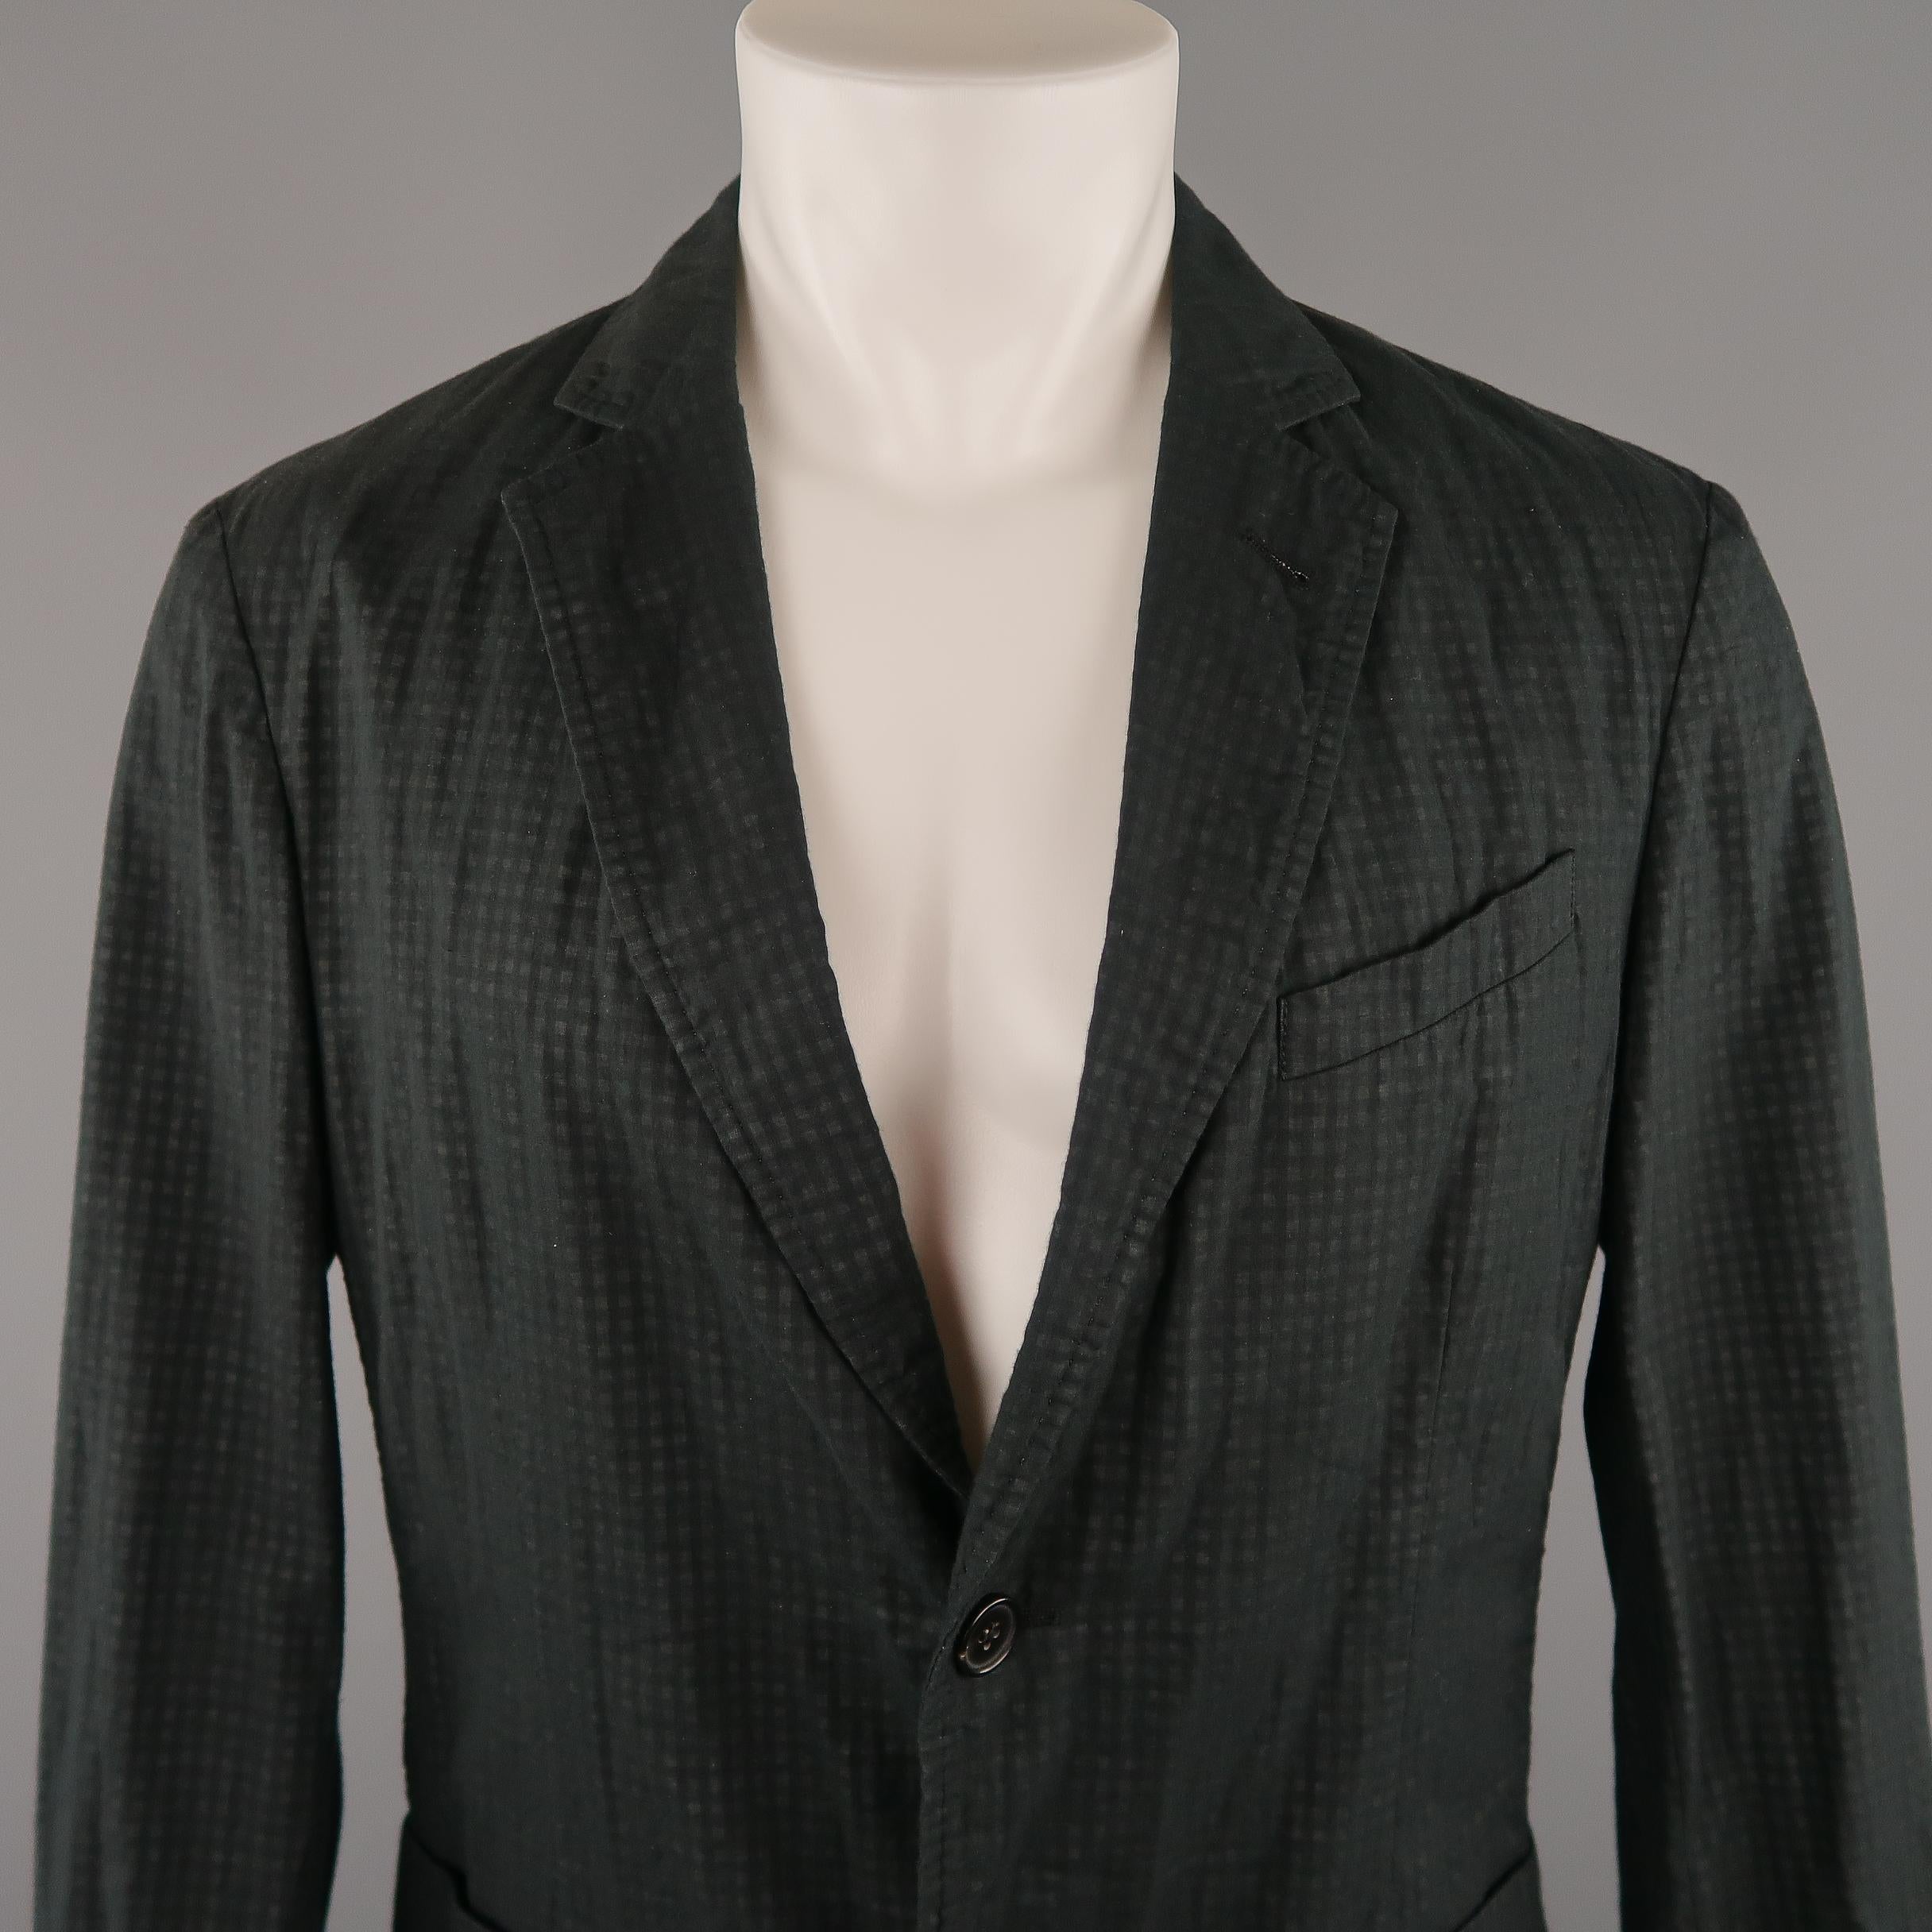 ARMANI COLLEZIONI Sport Coat comes in a black and grey tones in a checkered layered cotton material, with a notch lapel, slit and patch pockets, 2 buttons at closure, single breasted, with functional buttons at cuffs, unlined. Made in Italy.
 
New